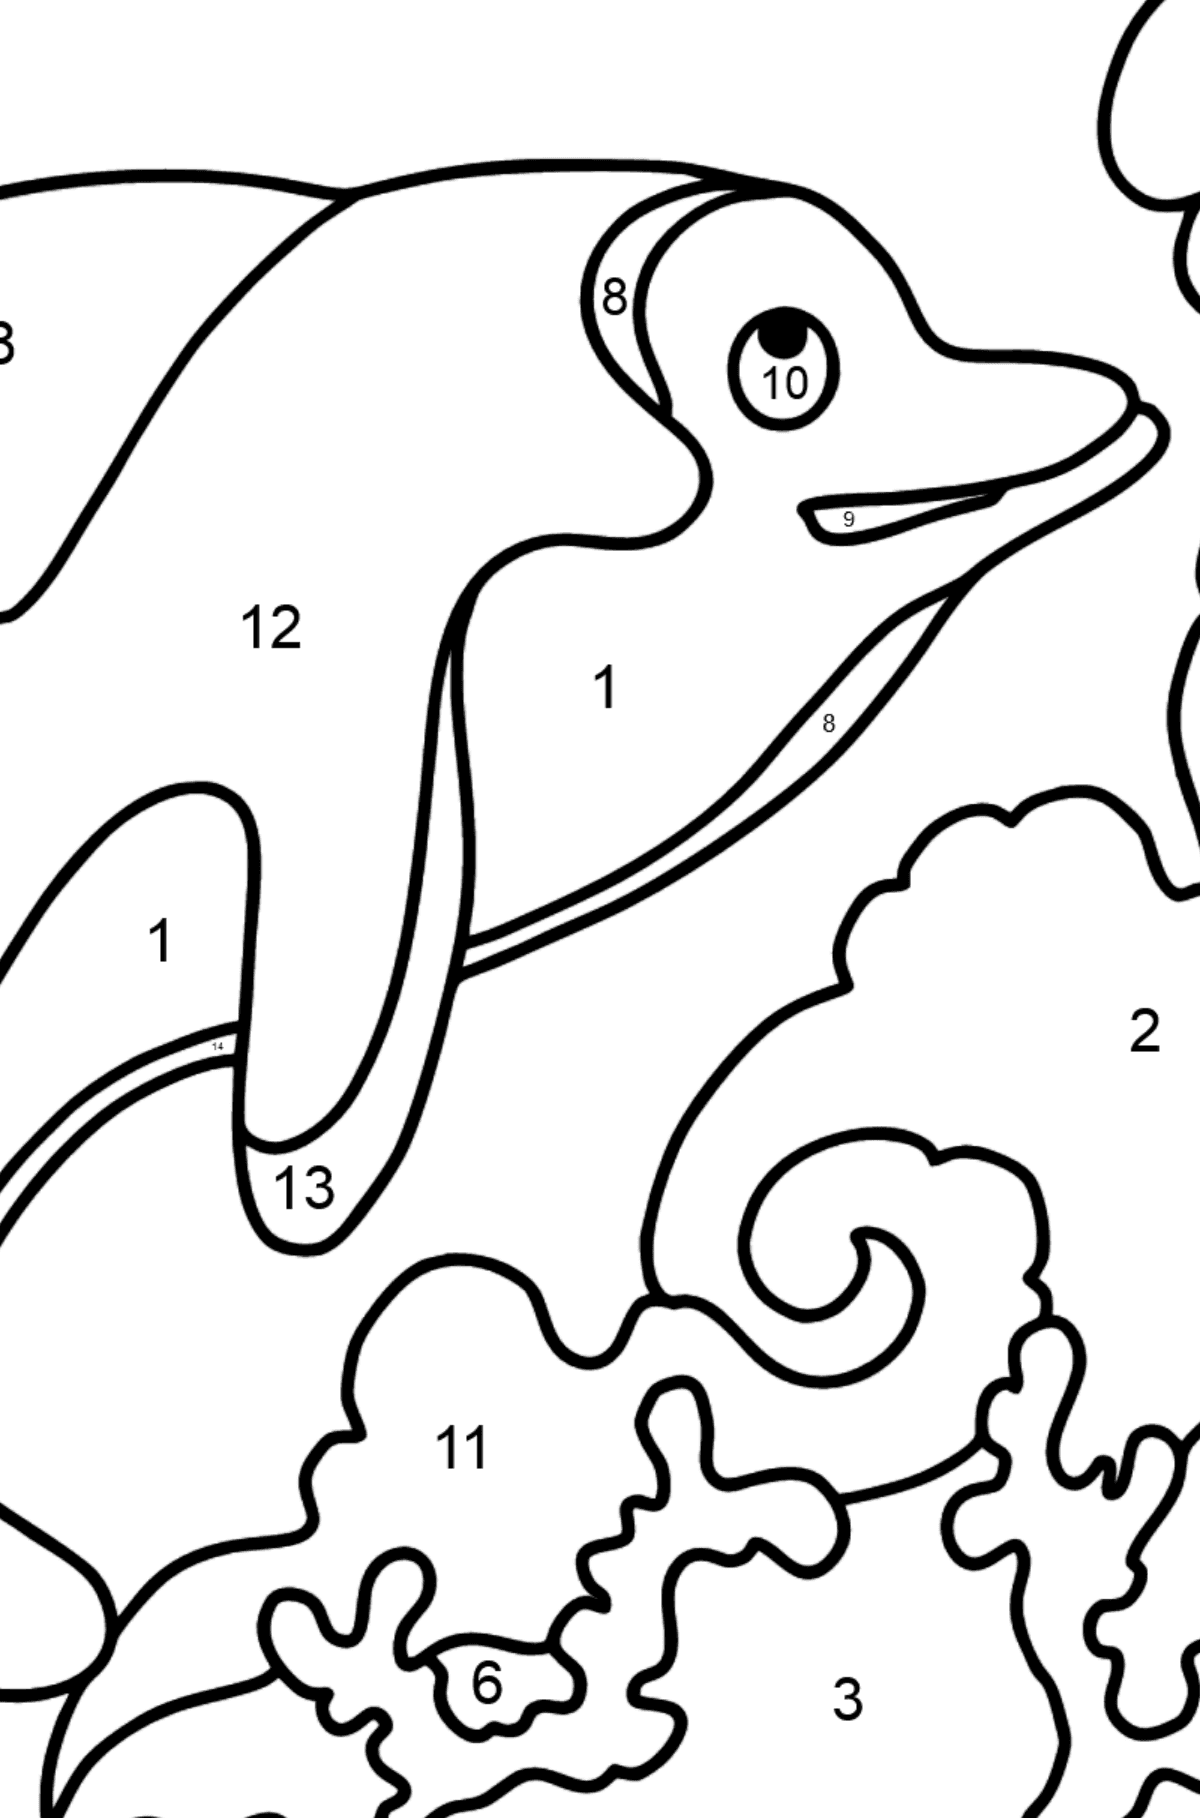 Coloring Page - A Dolphin, an Inquisitive Animal - Coloring by Numbers for Kids